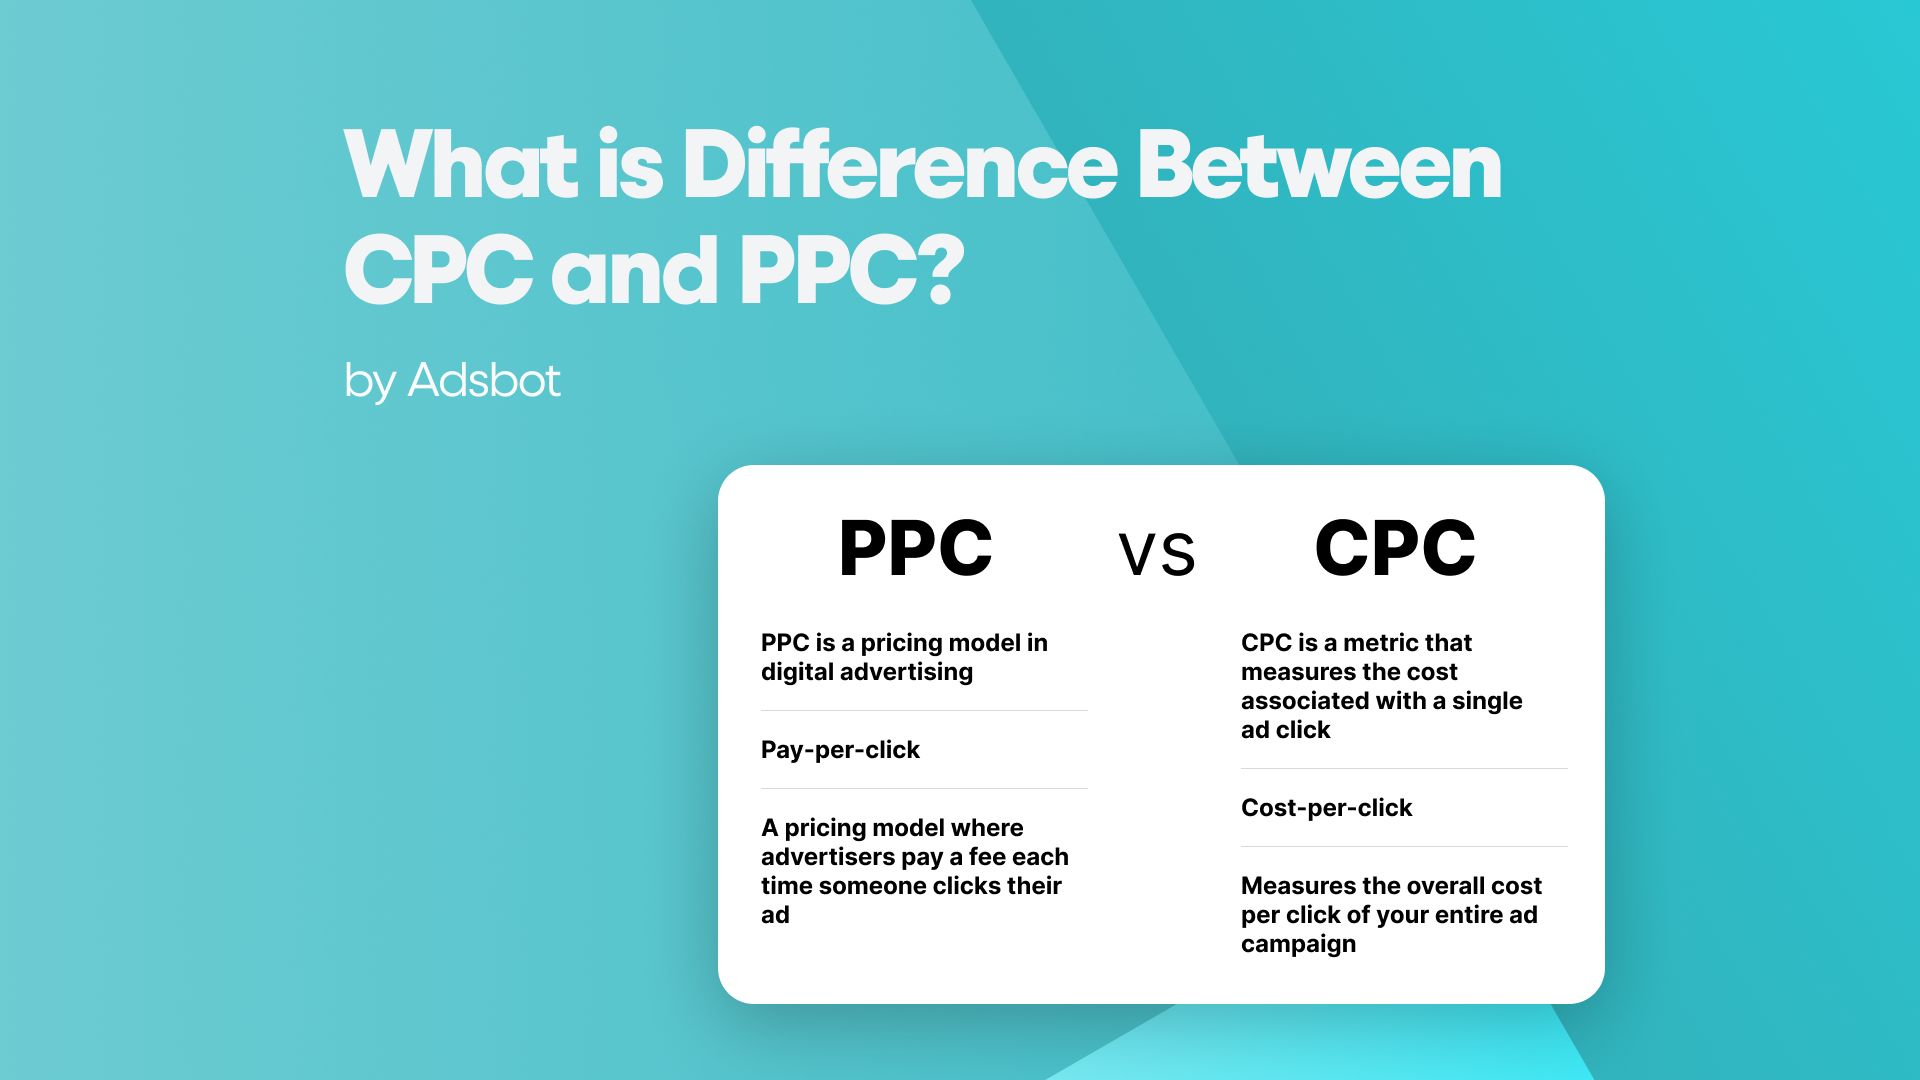 CPC and PPC